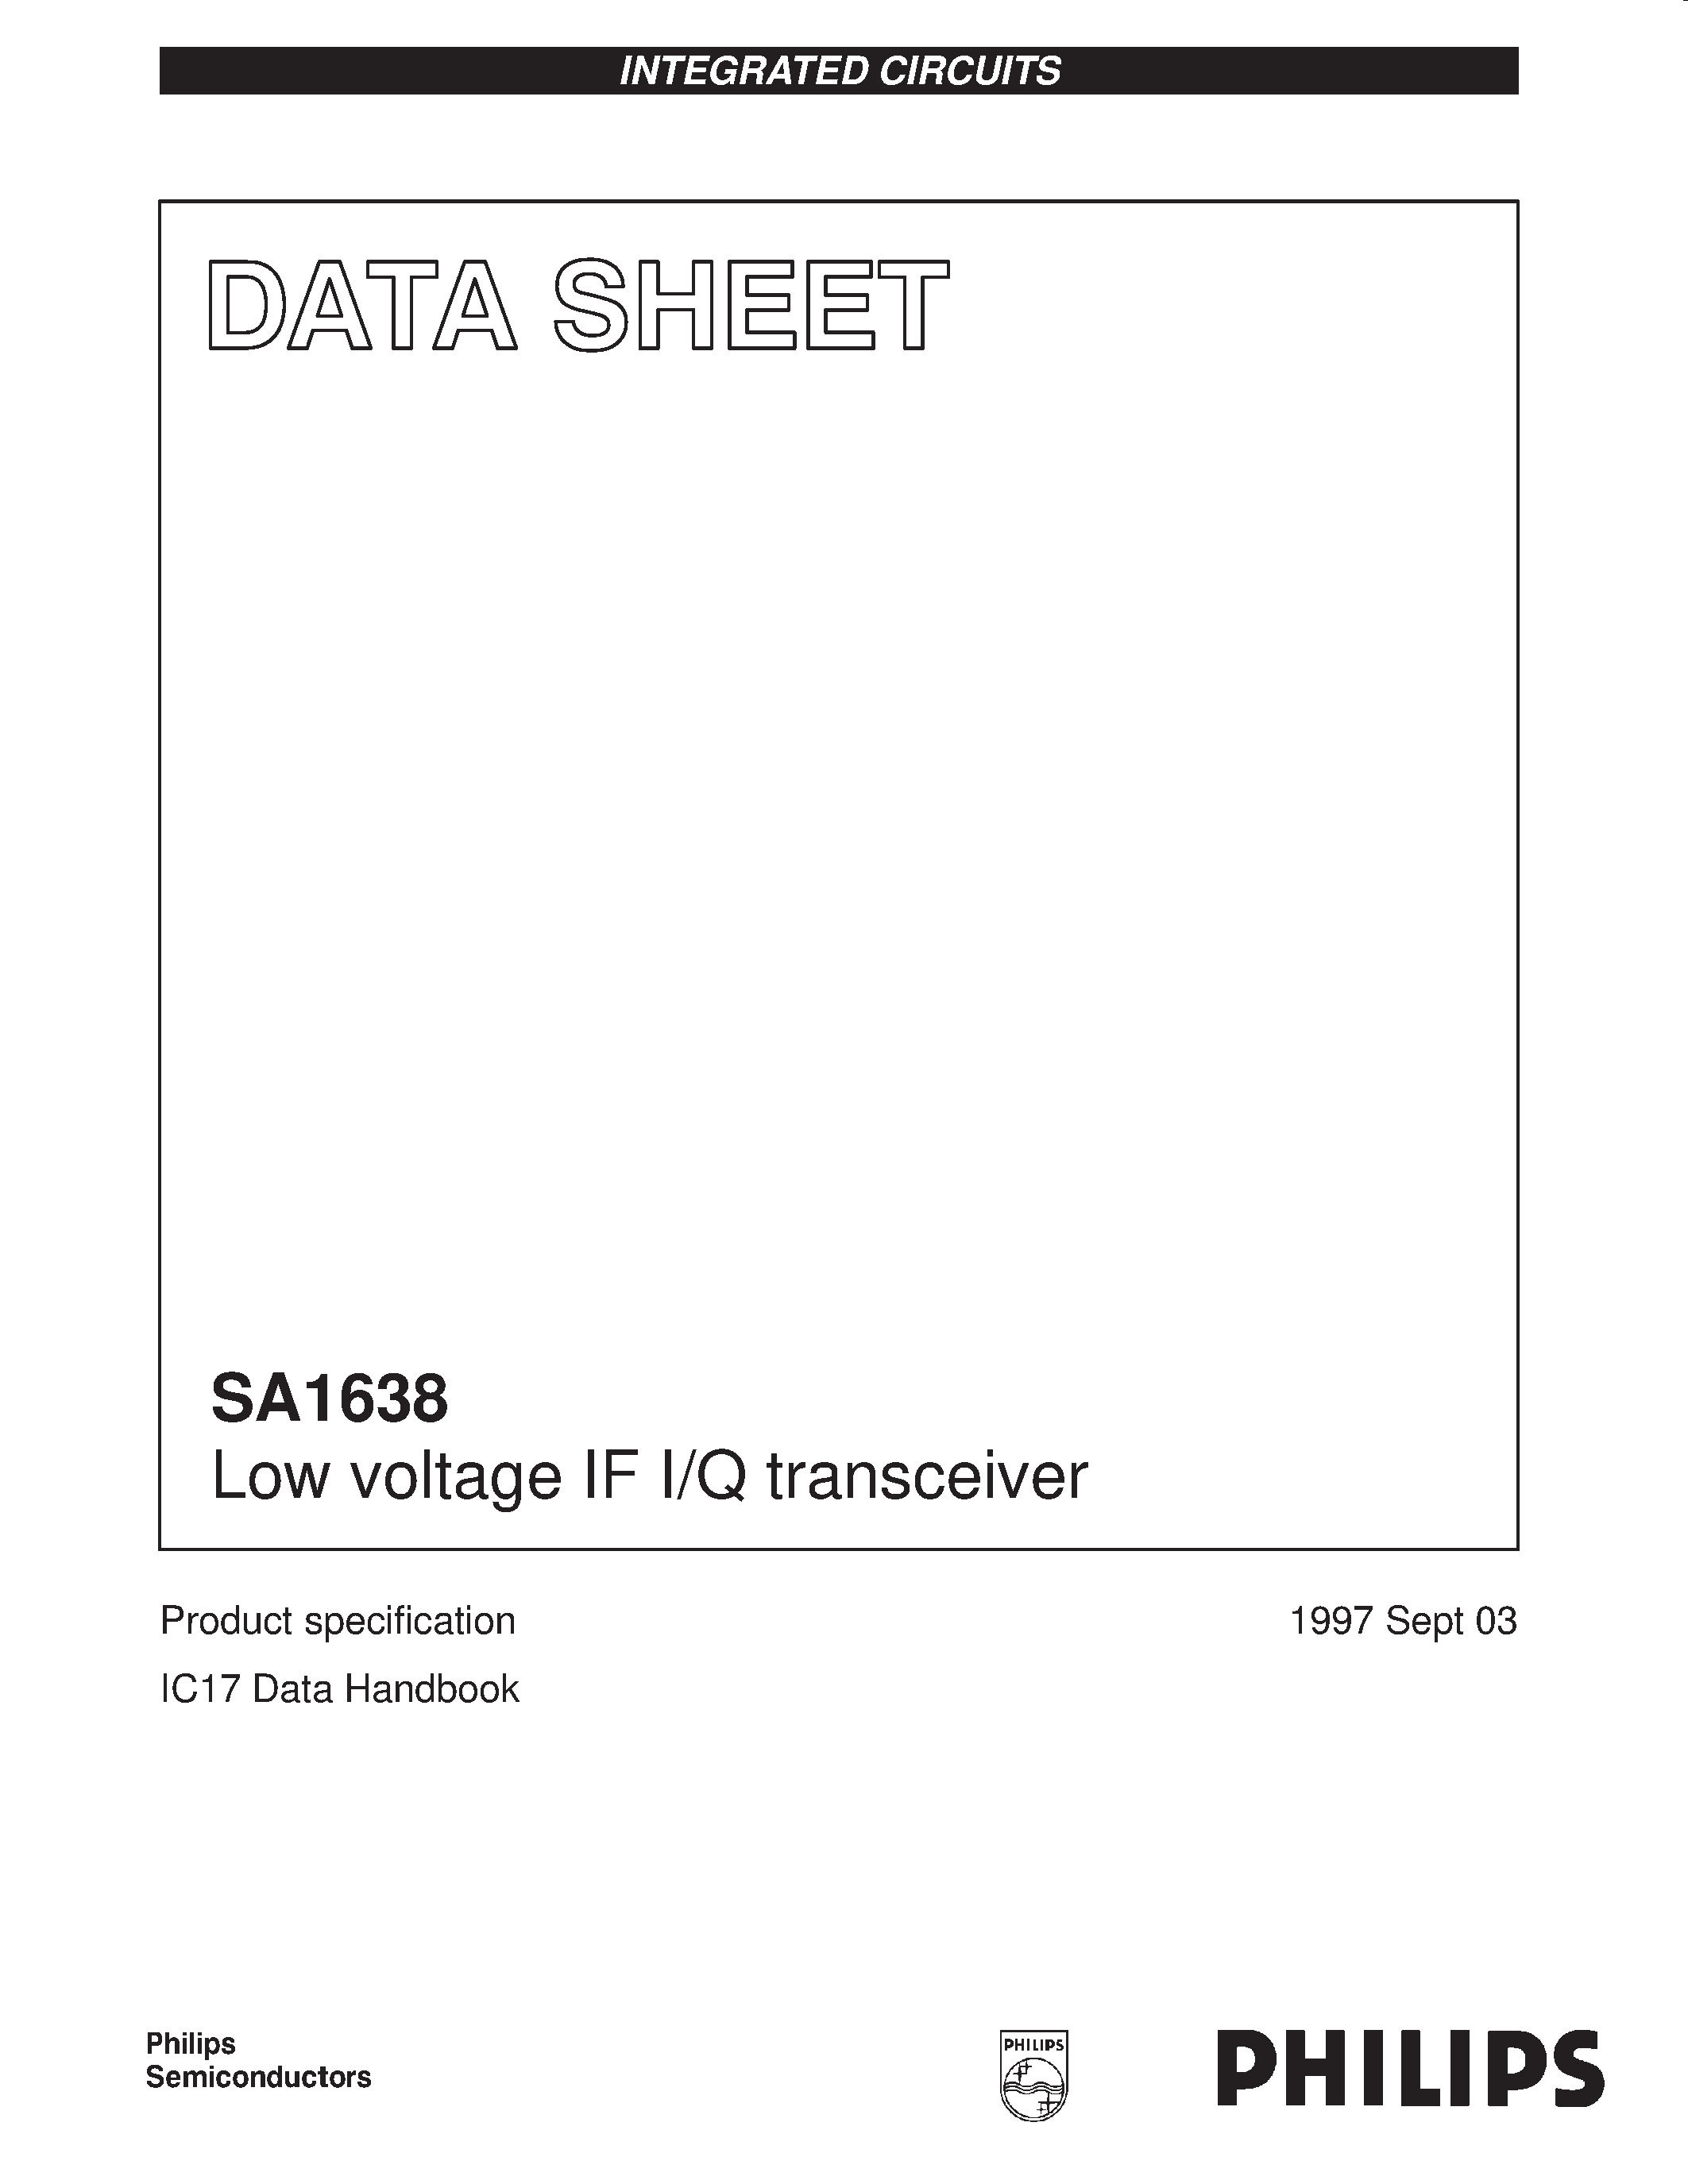 Datasheet SA1638BE - Low voltage IF I/Q transceiver page 1